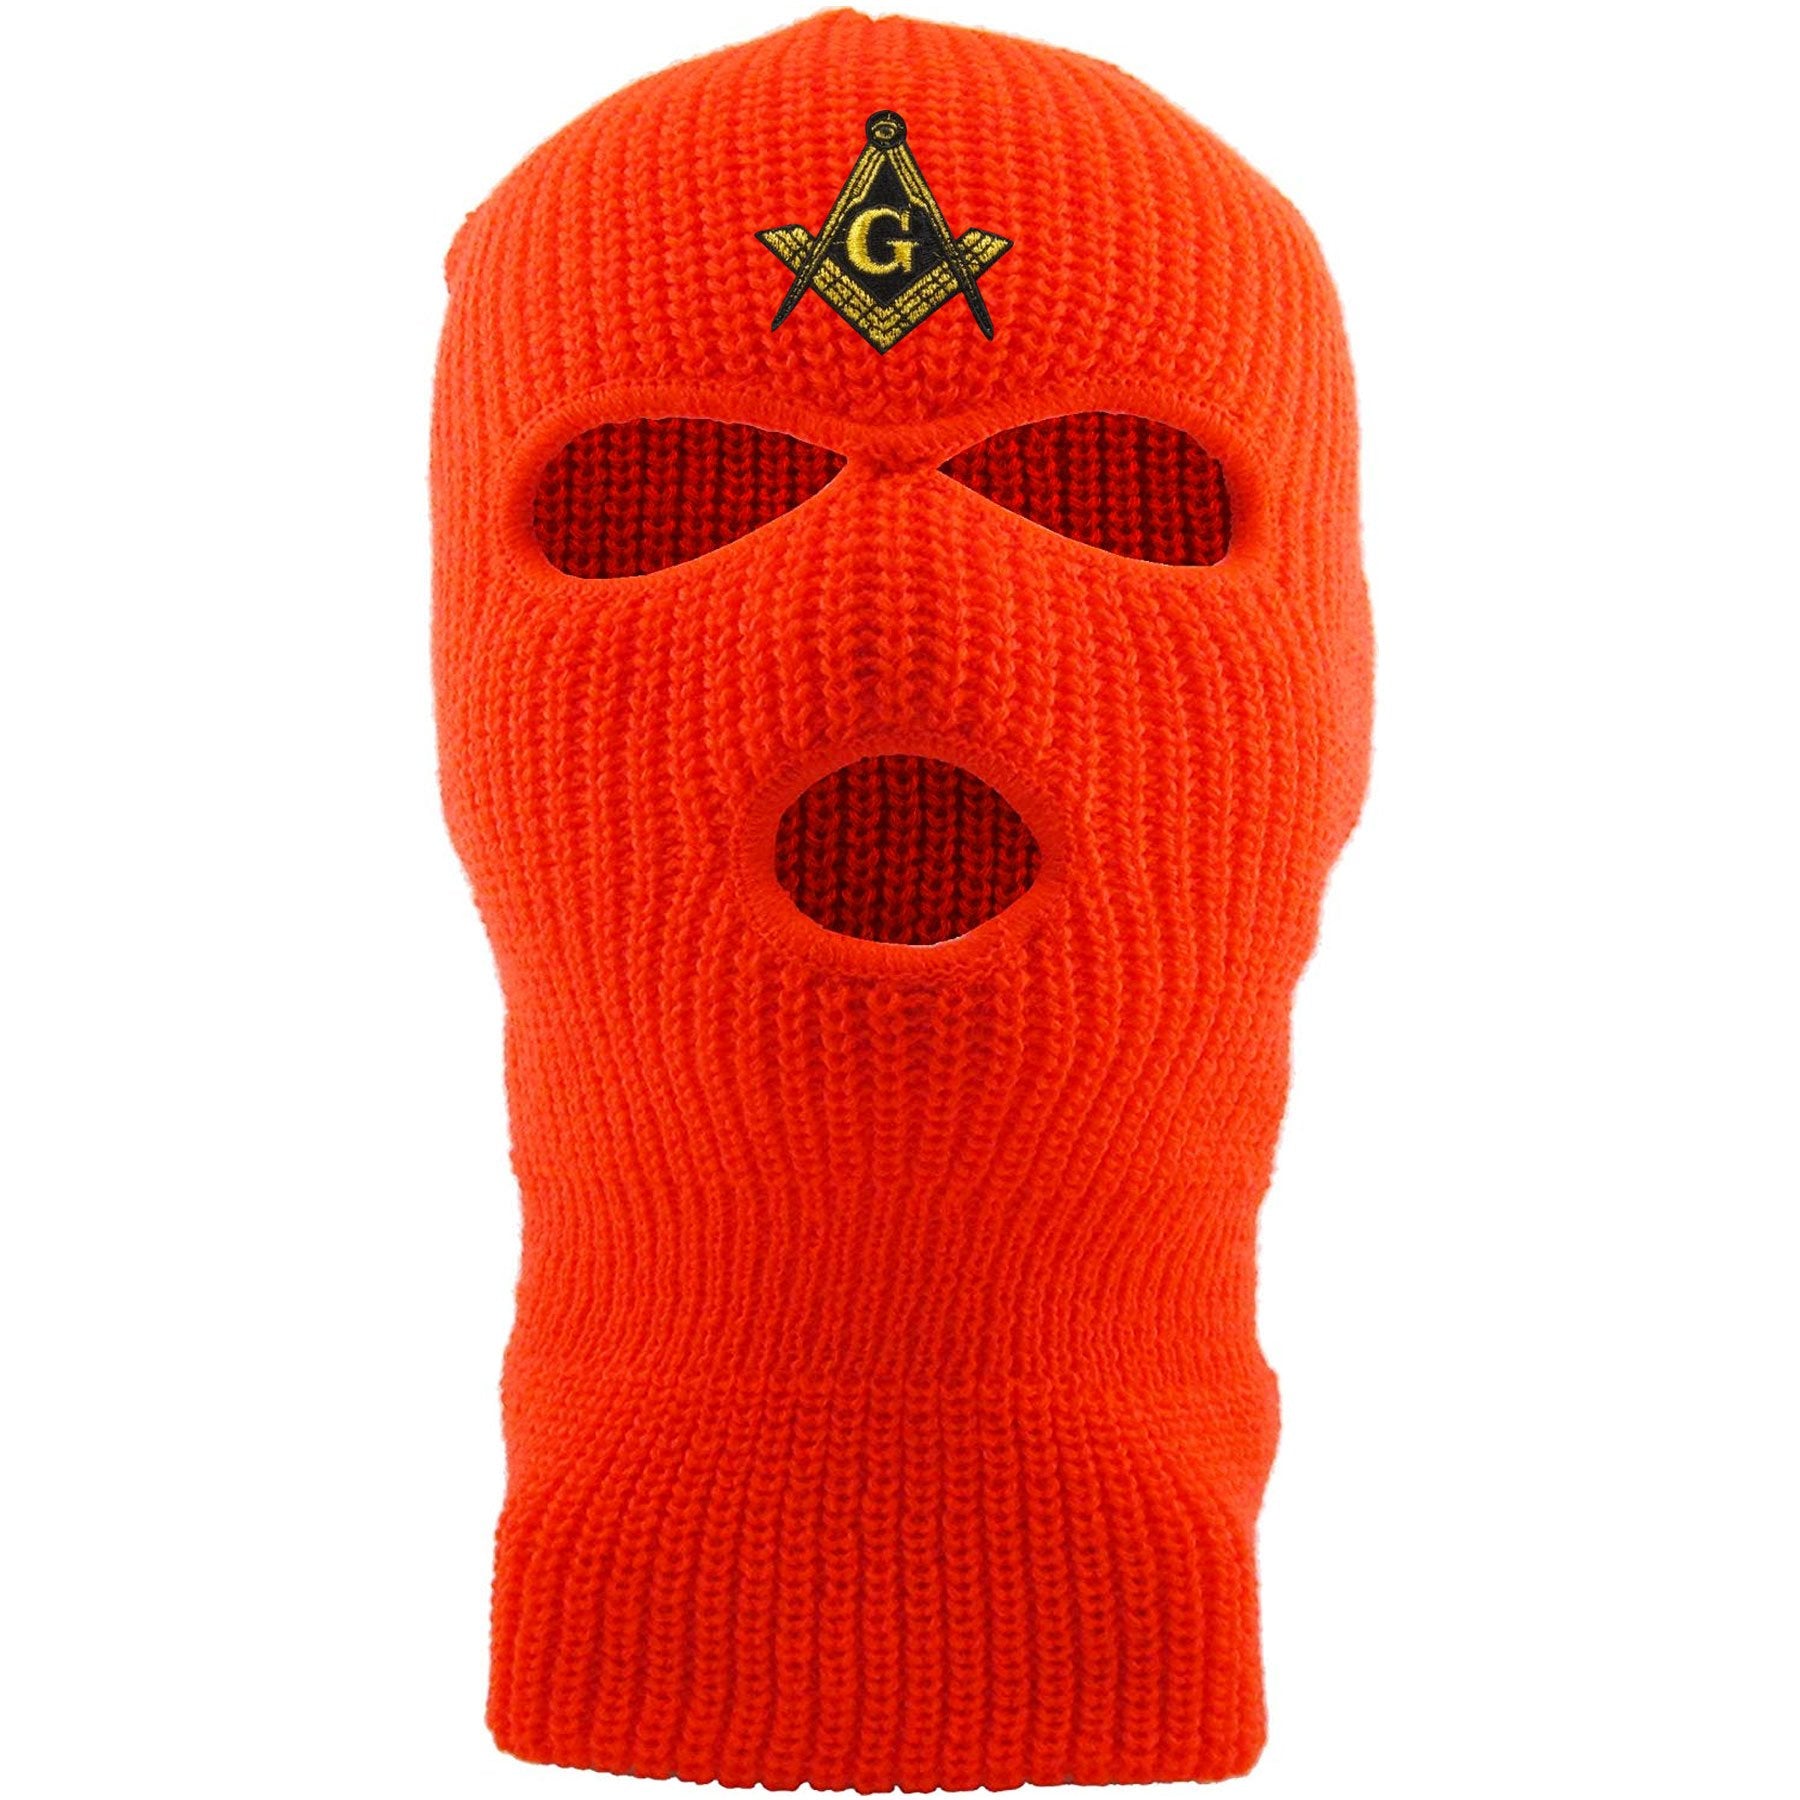 Embroidered on the front of the safety orange masonic ski mask is the free mason square compass logo embroidered in gold and black